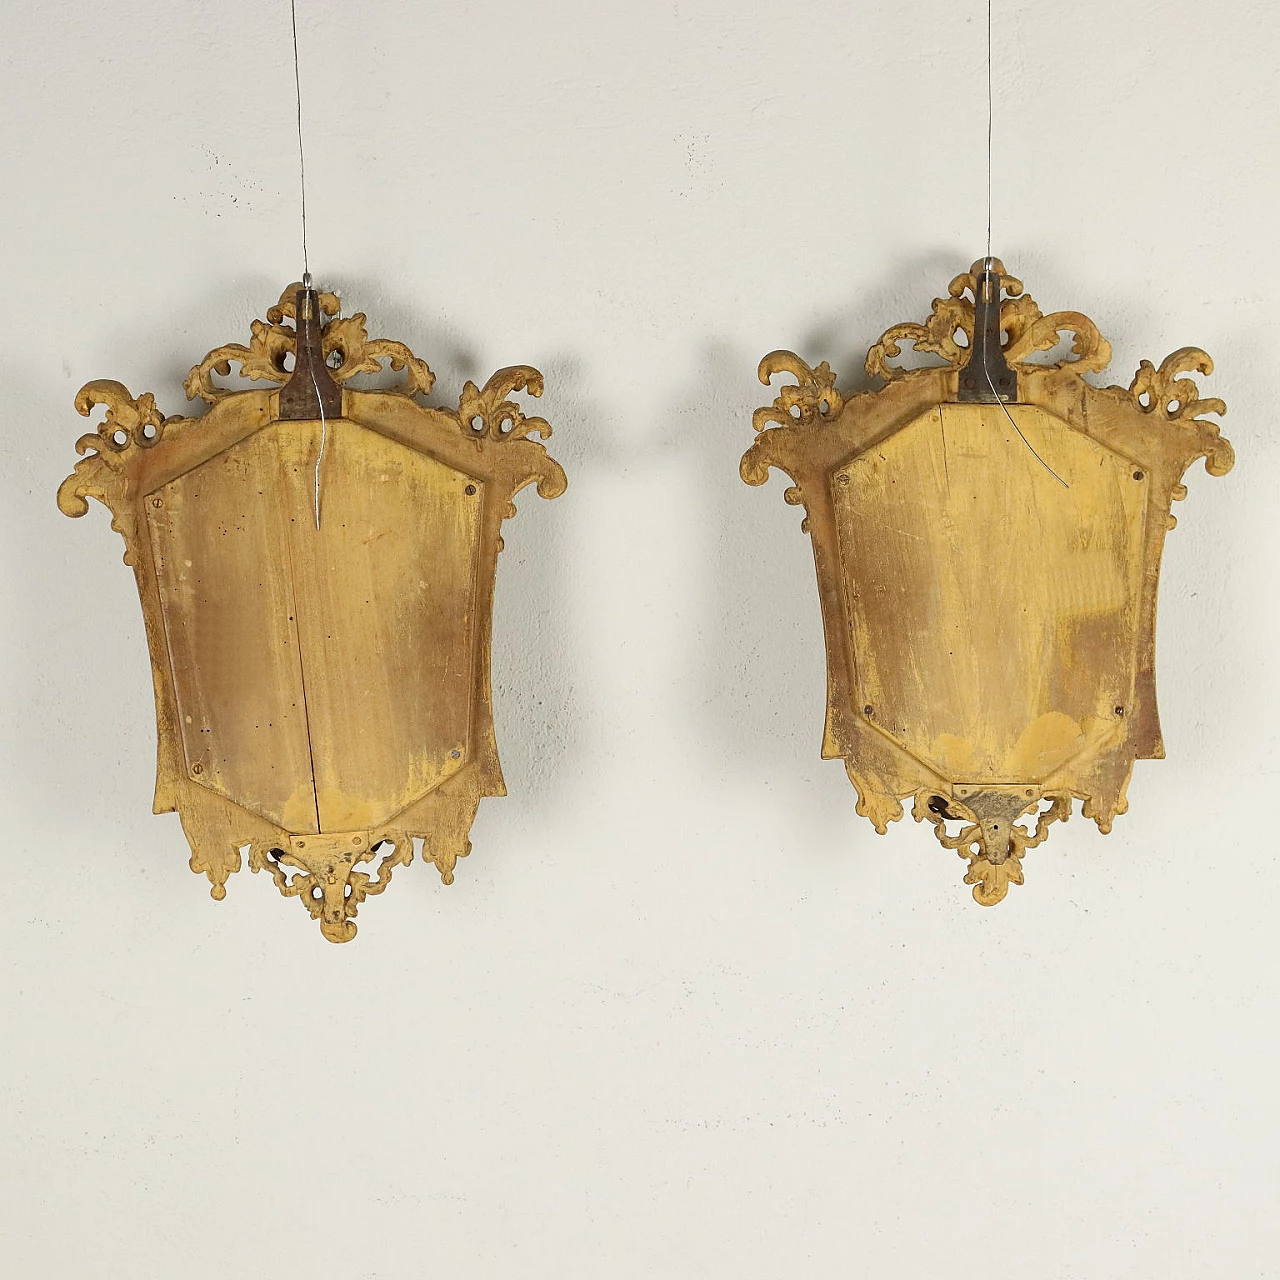 Pair of Baroque embossed sheet metal mirrors with lamp-holding arms, early 18th century 7